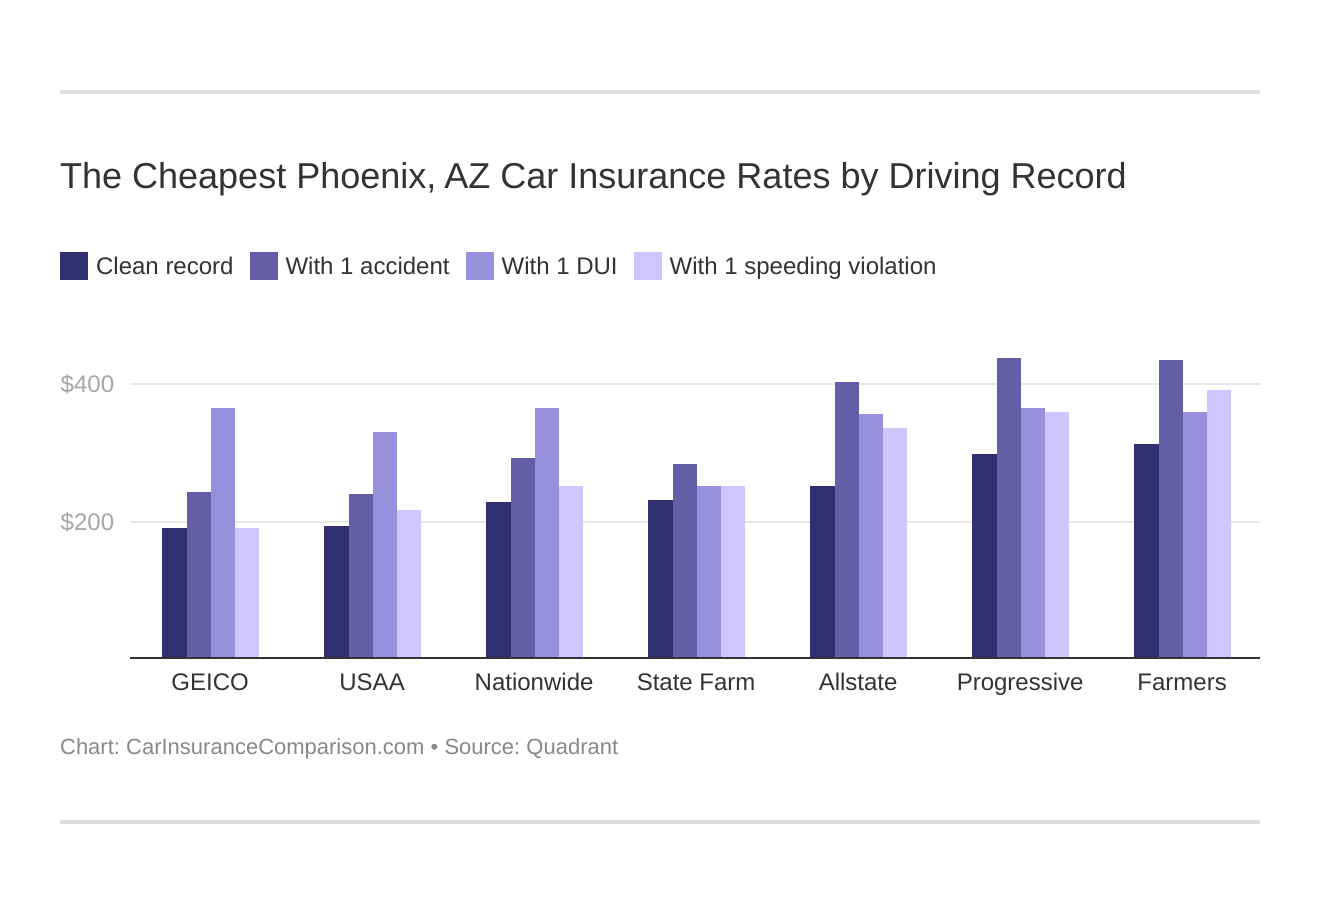 The Cheapest Phoenix, AZ Car Insurance Rates by Driving Record